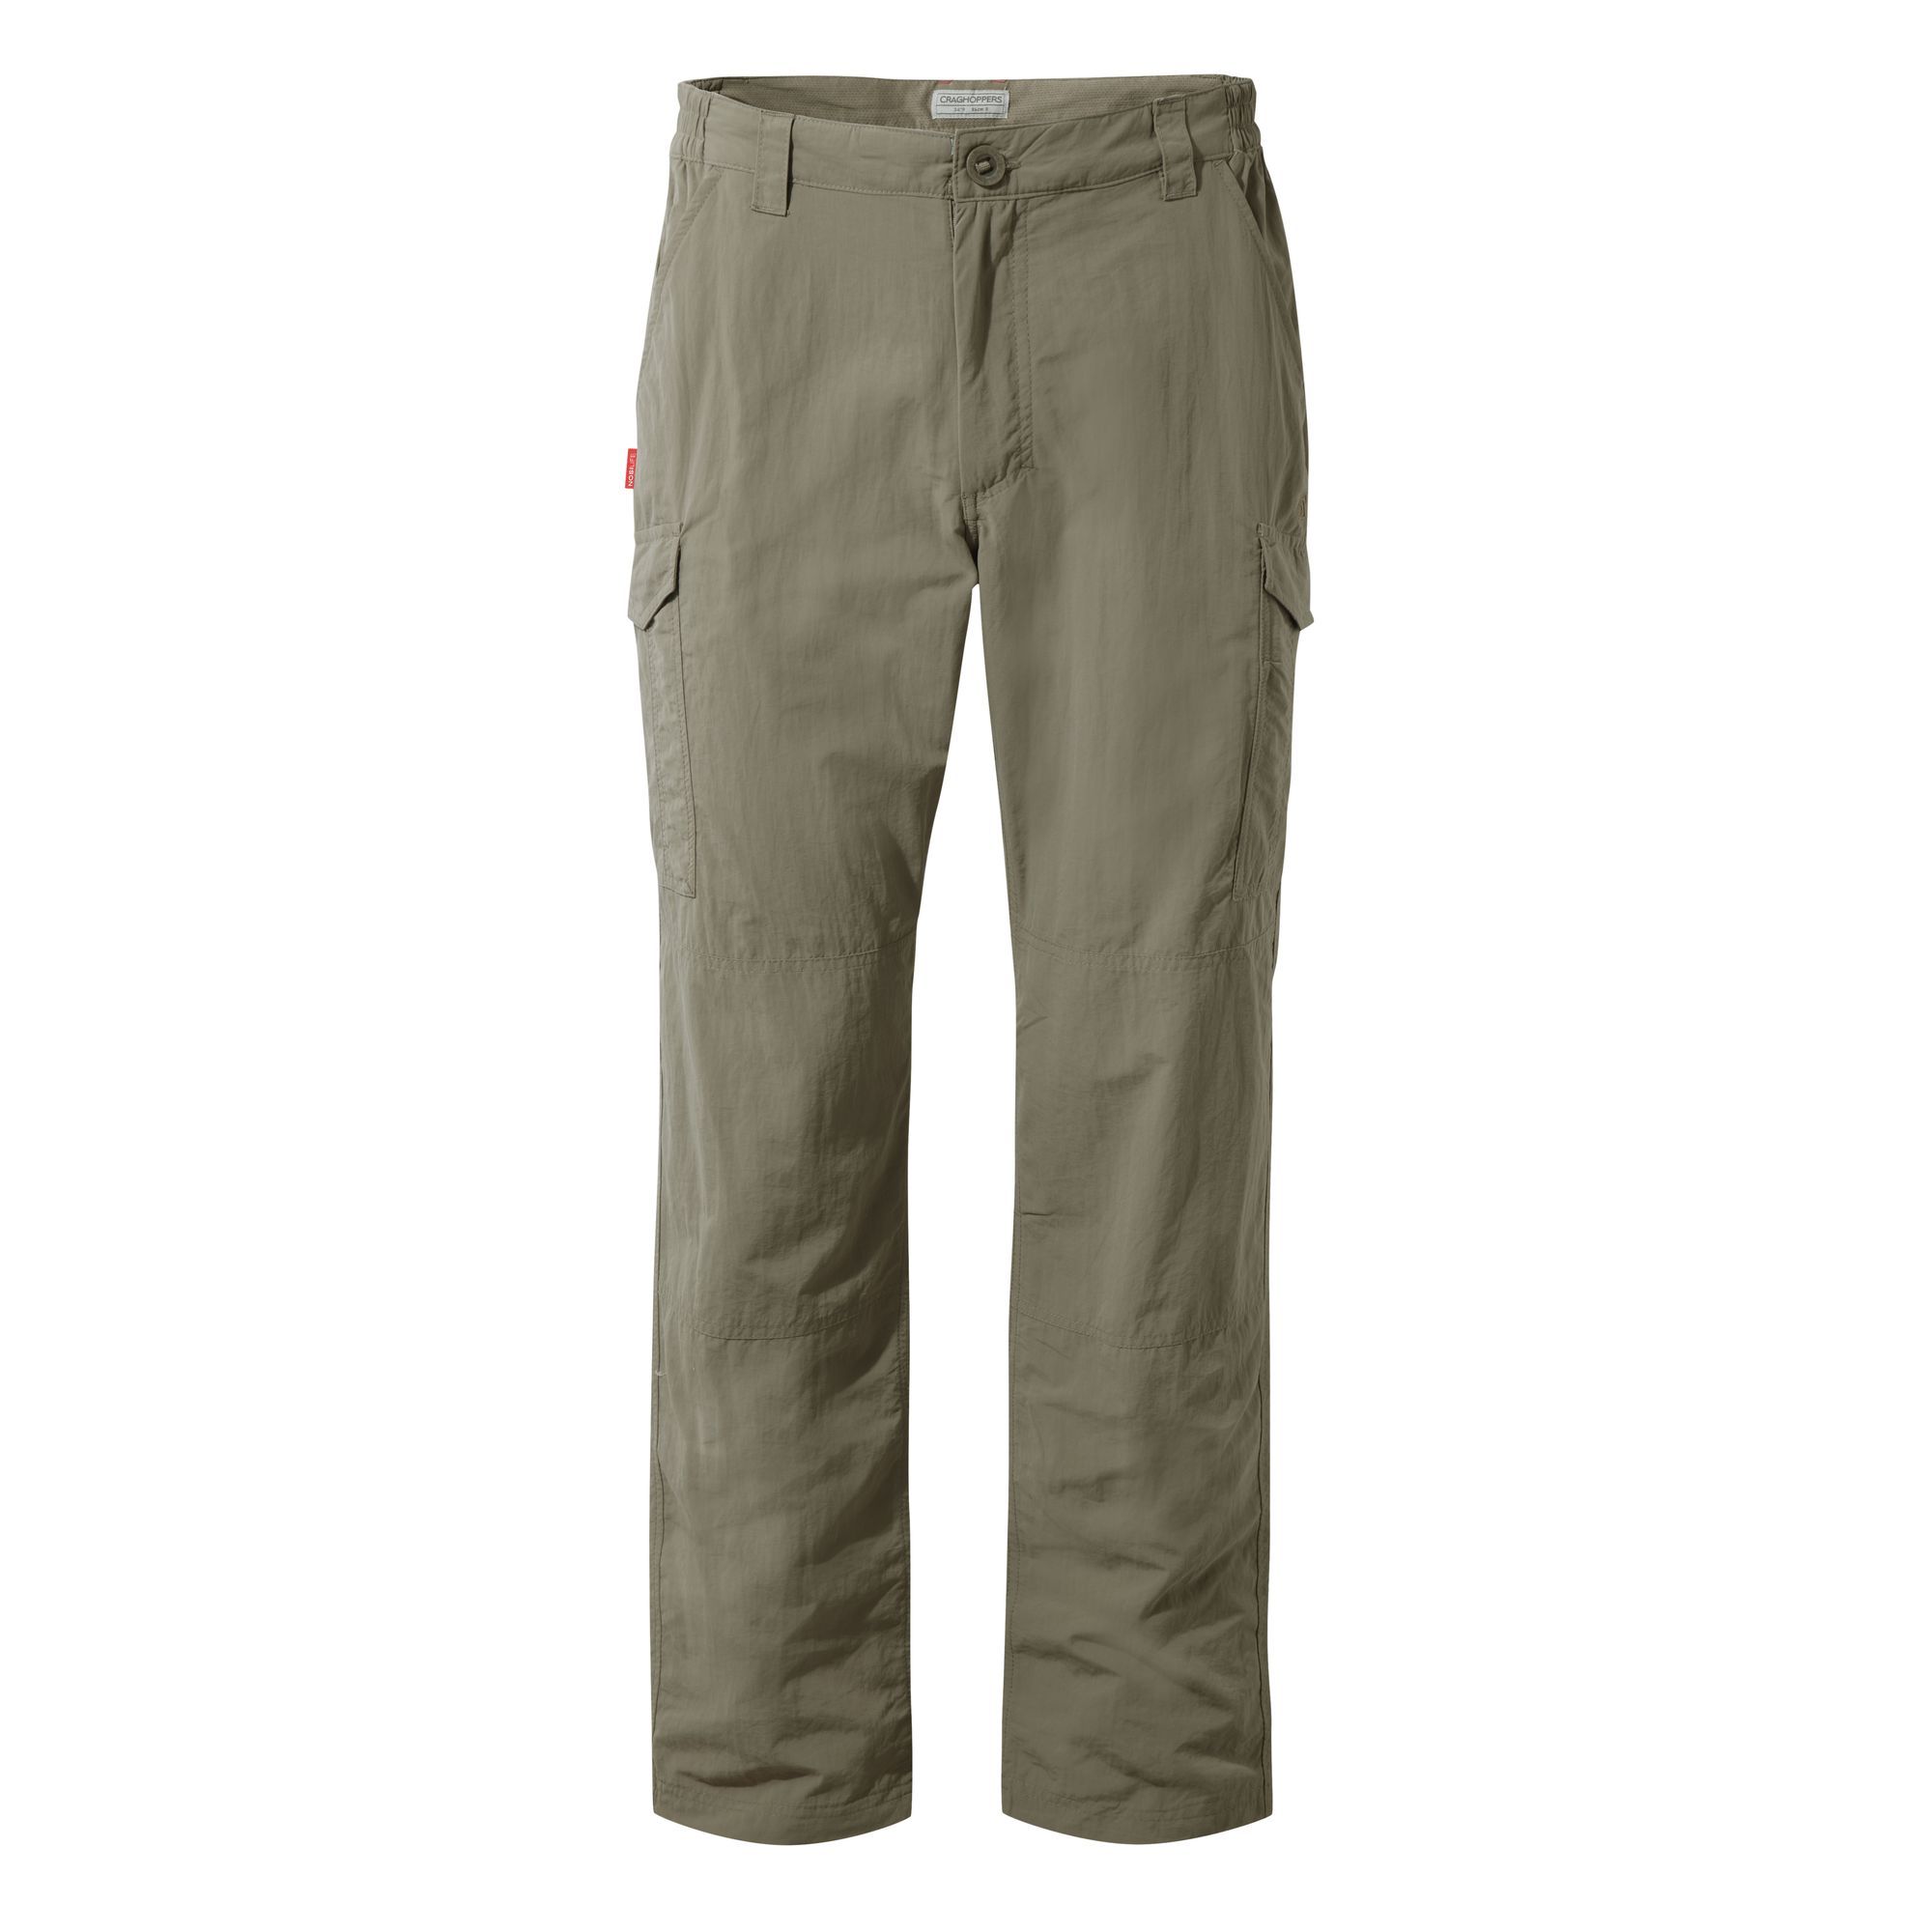 Craghoppers - Nosilife Cargo Trousers - Walking trousers - Men's